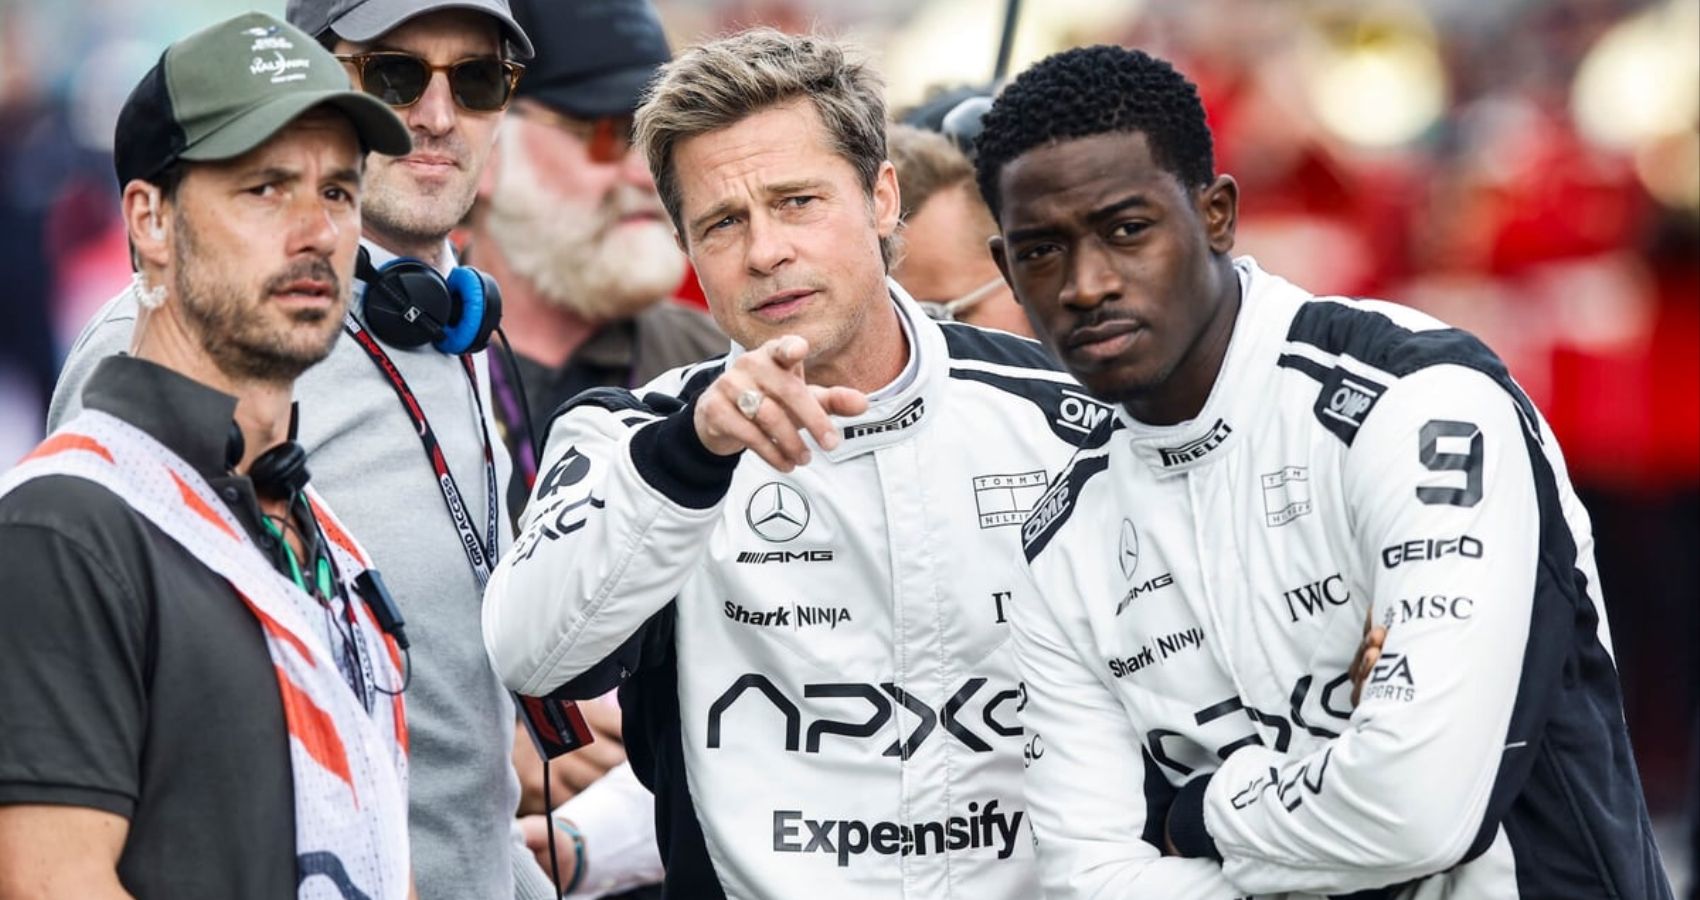 Bradd Pitt And Damson Idris joined the real drivers on the 2023 British GP grid